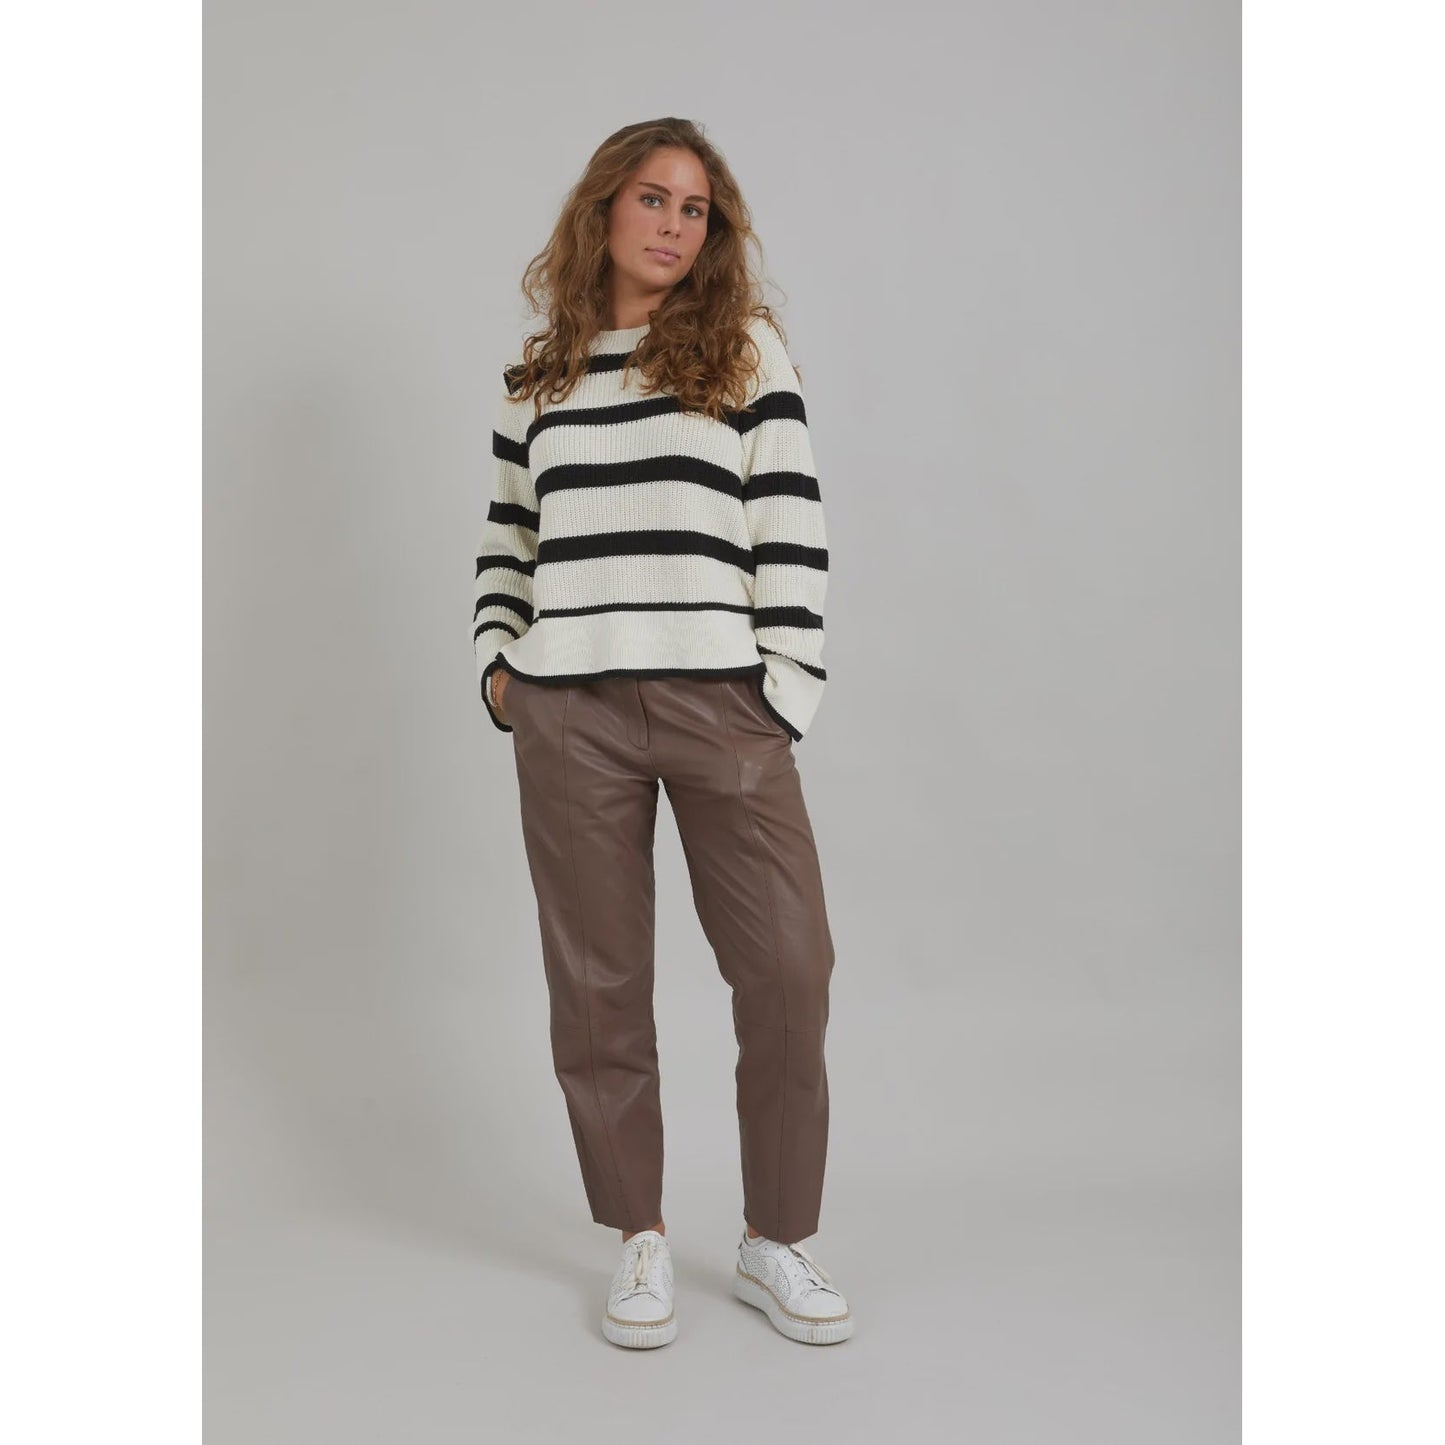 Coster Knit with Stripes and Wide Cuffs - Cream Black Stripe